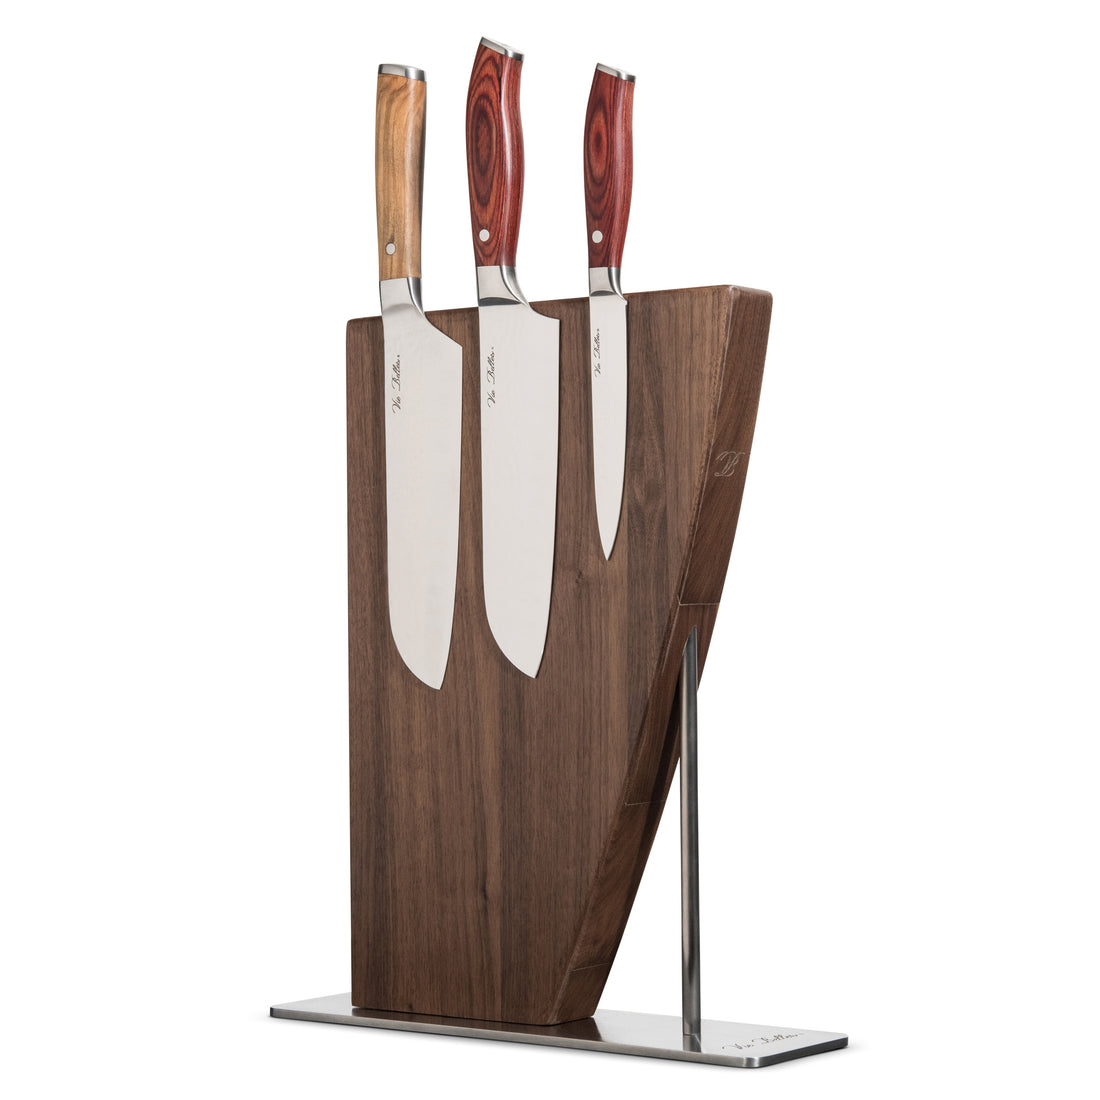 How to Care for Your Knife Block?